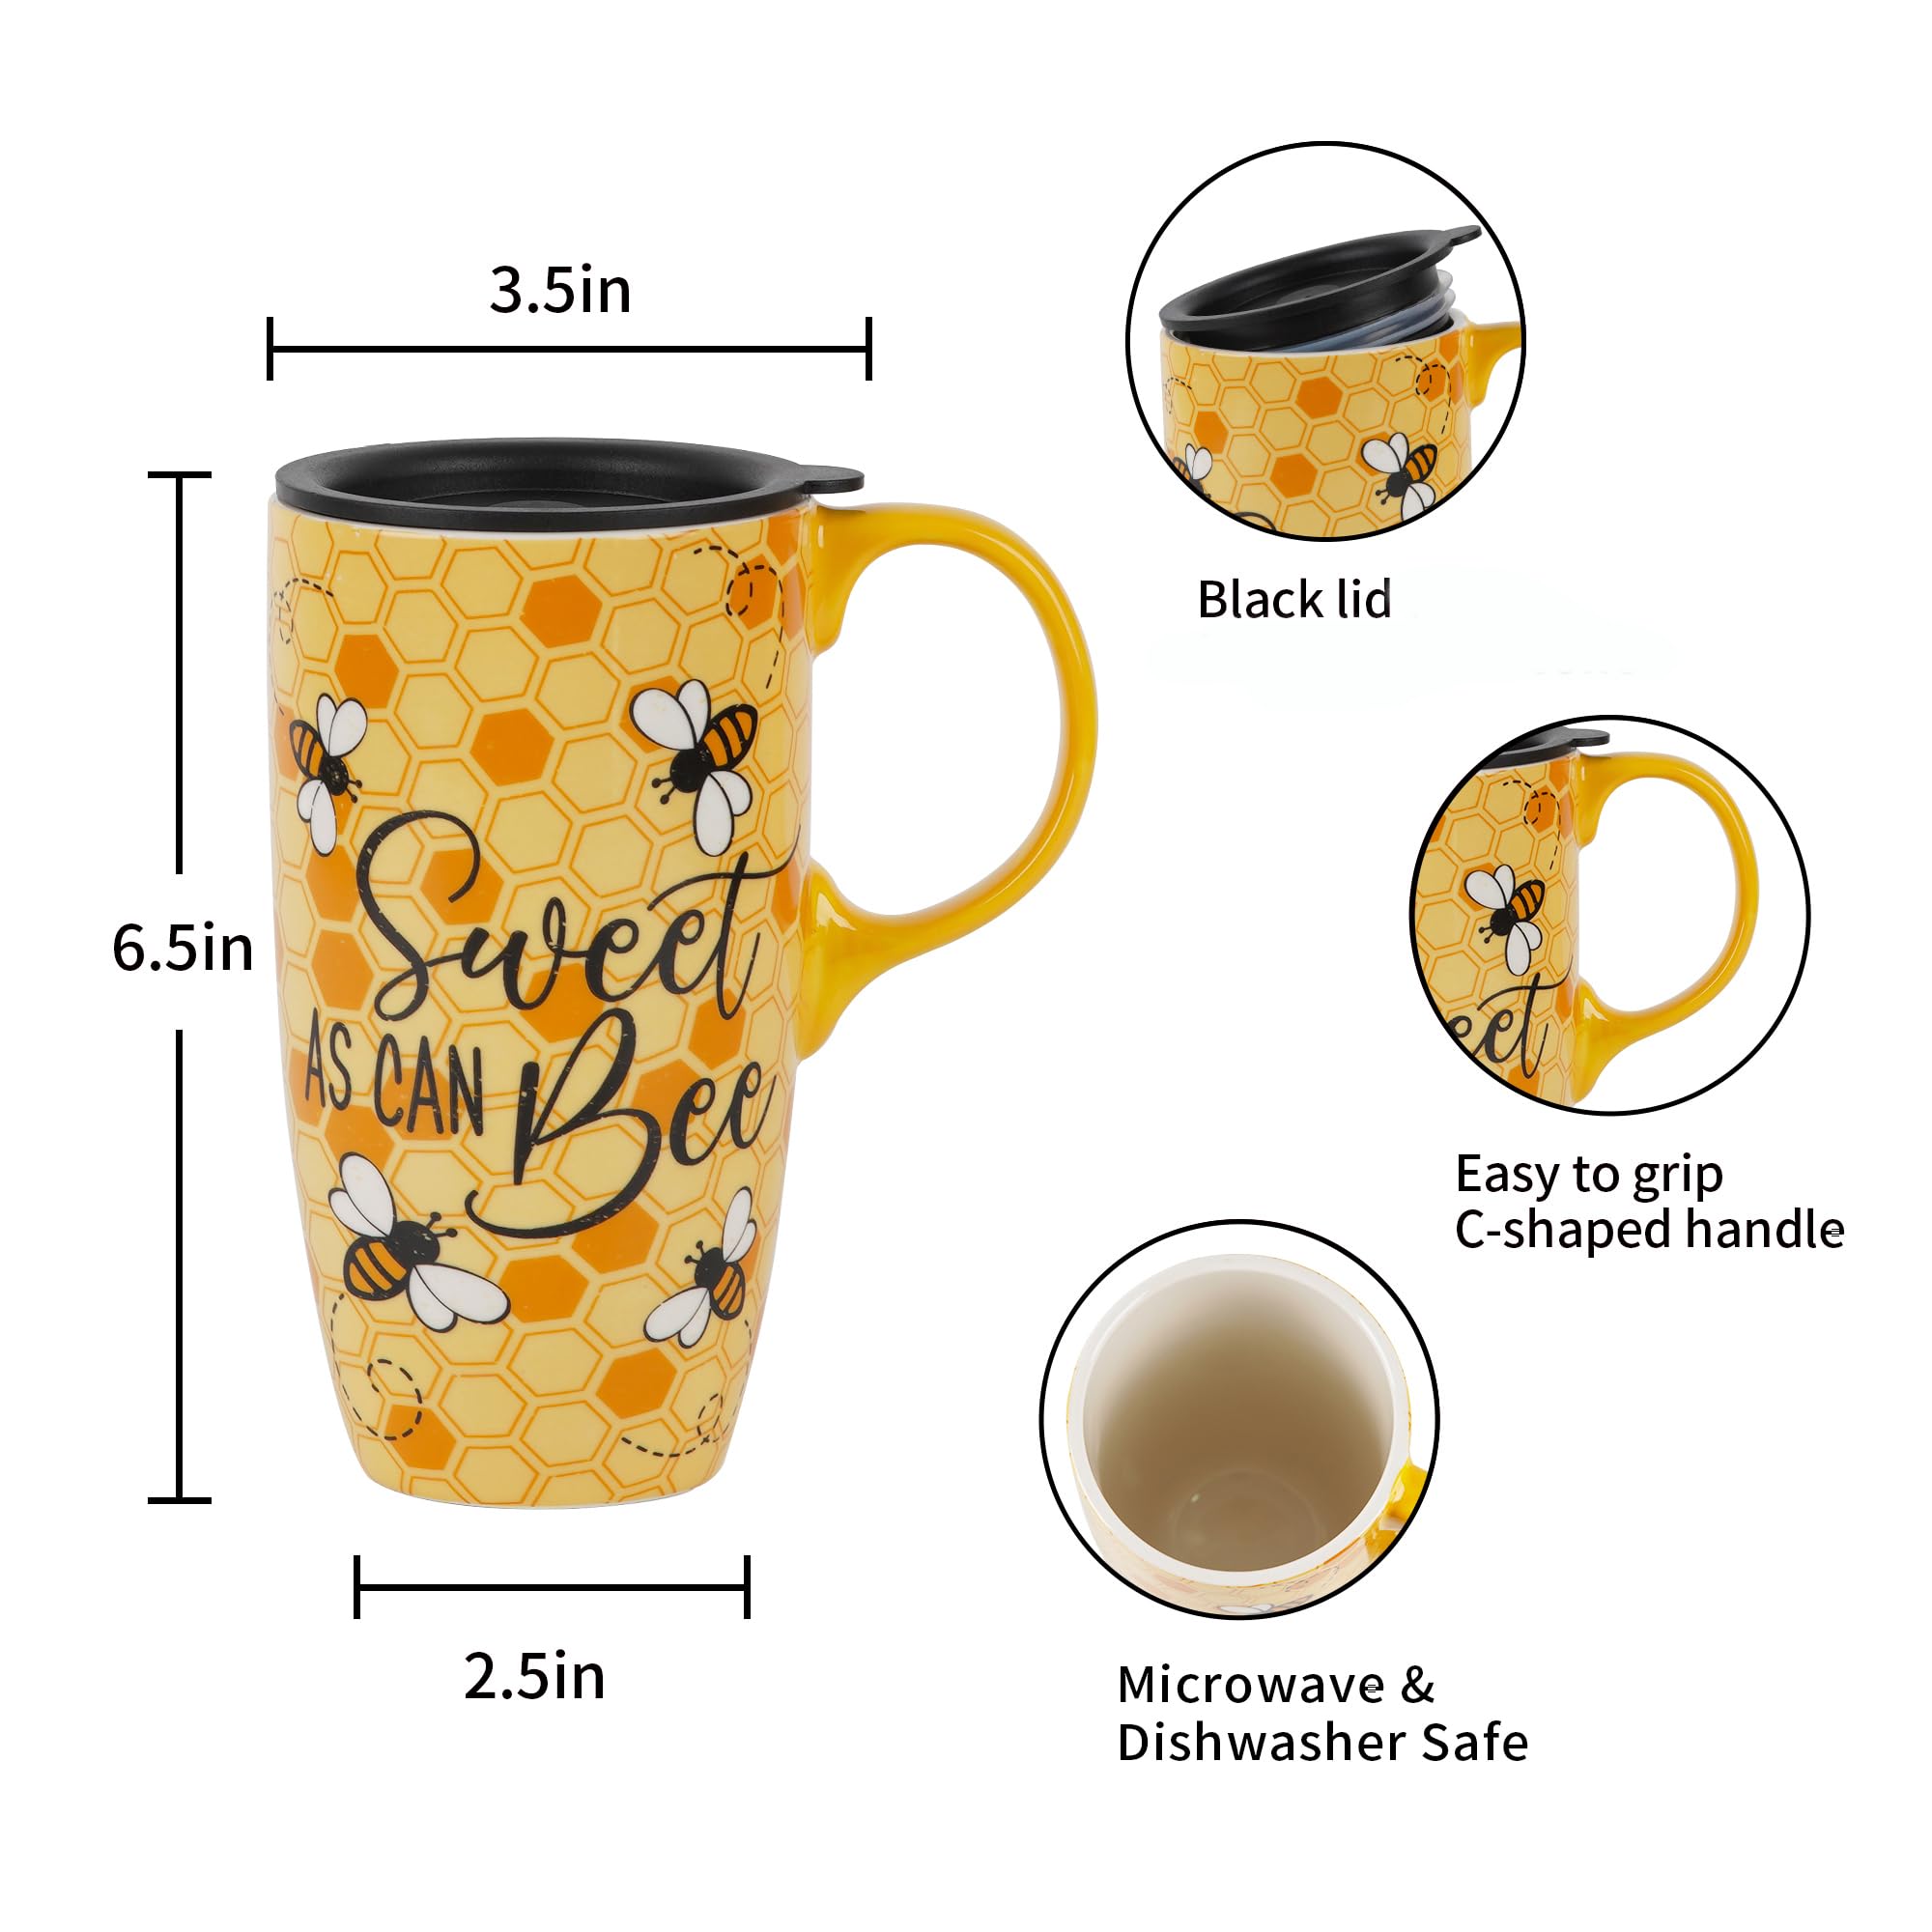 Topadorn Ceramic Coffee Mug Travel Cup Gift with Lid 17oz., Porcelain Tall Tea Cup with Handle for Home & Office, Bee Art Pattern Mug in Gift Box, 6.5''H